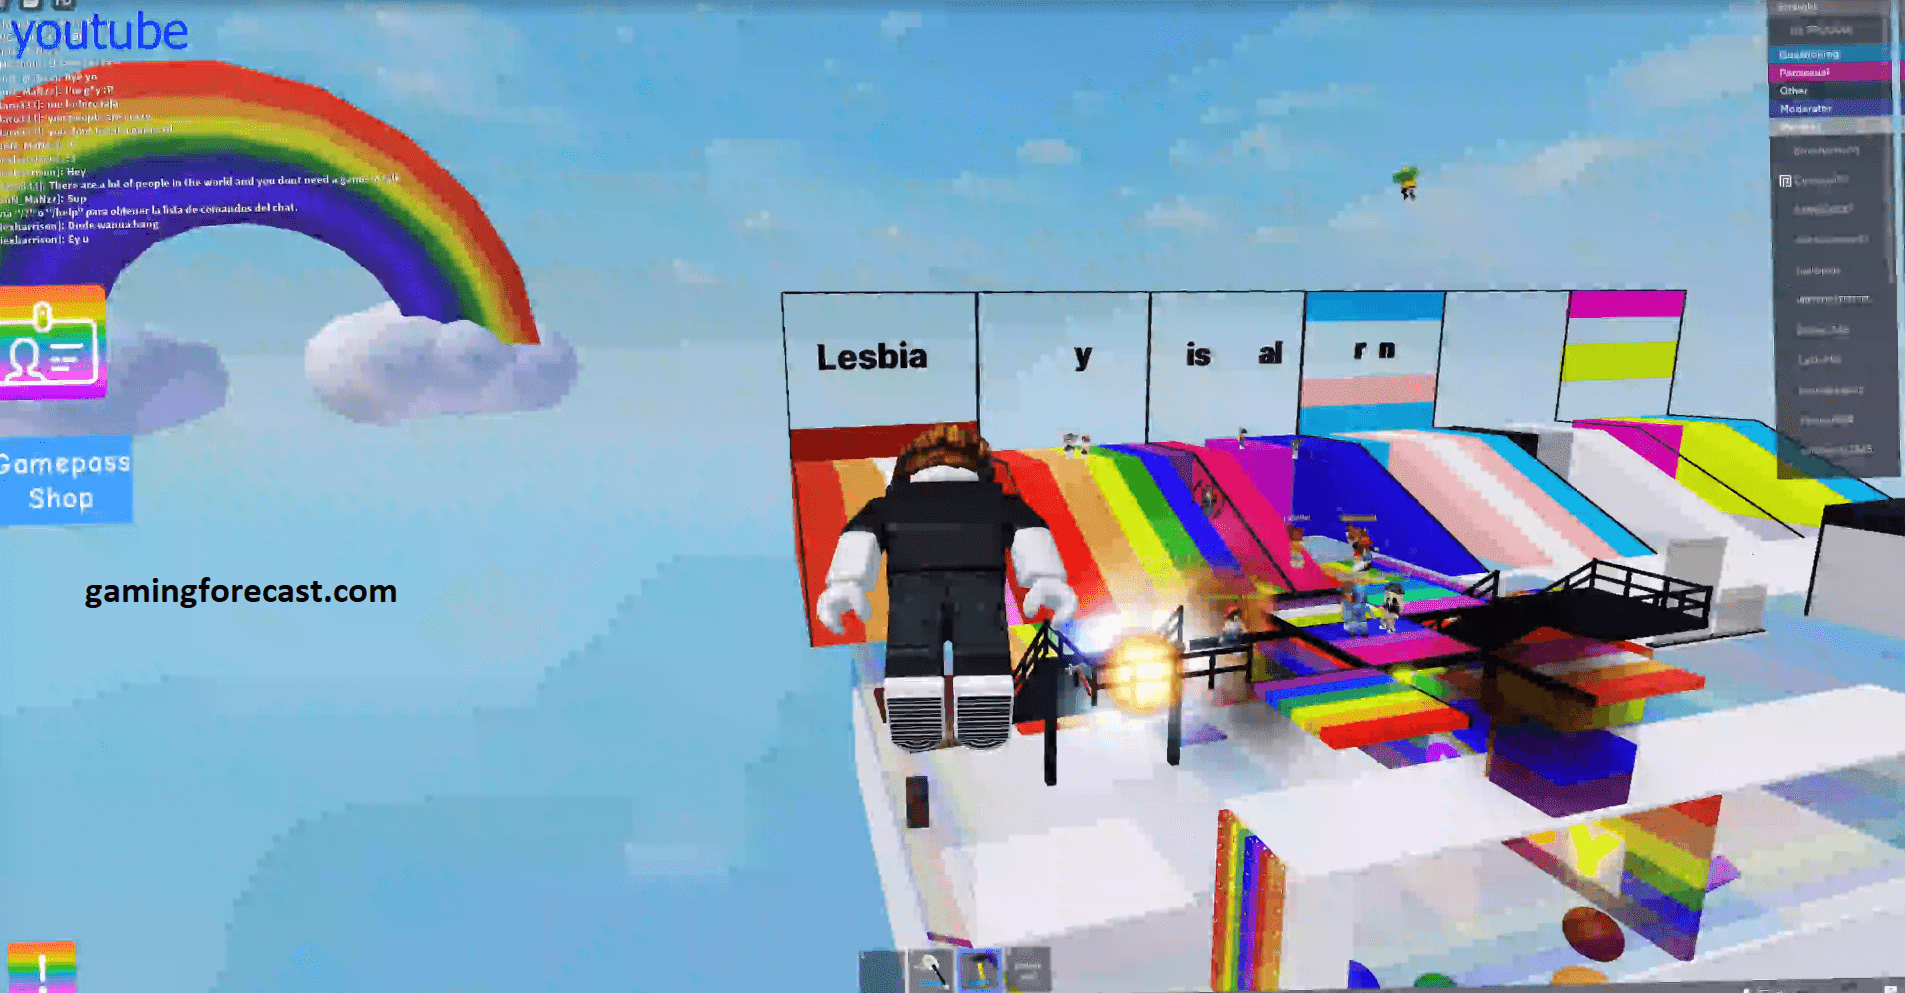 Roblox Hack Download Pc Destroy Lobby Fly Aimbot Scripts 2021 Gaming Forecast Download Free Online Game Hacks - roblox jailbreak game dll